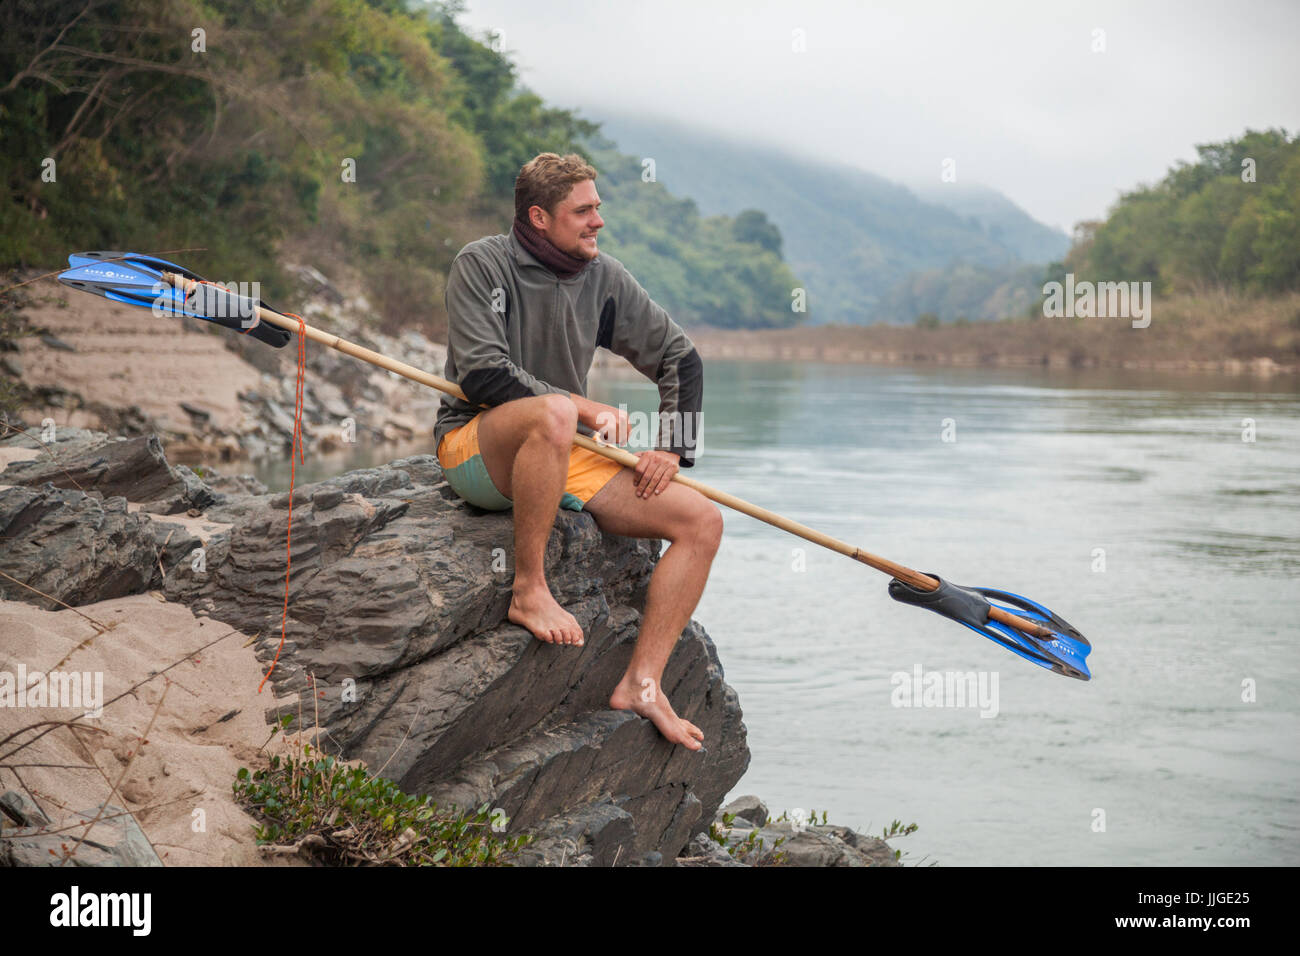 Jan, from the Netherlands, poses with his bamboo and flipper paddle at this campsite on the shore of the Nam Ou River, Laos. He ultimately paddled from Muang Khua to Nong Khiaw on a bamboo raft he had constructed with the input of locals. Stock Photo